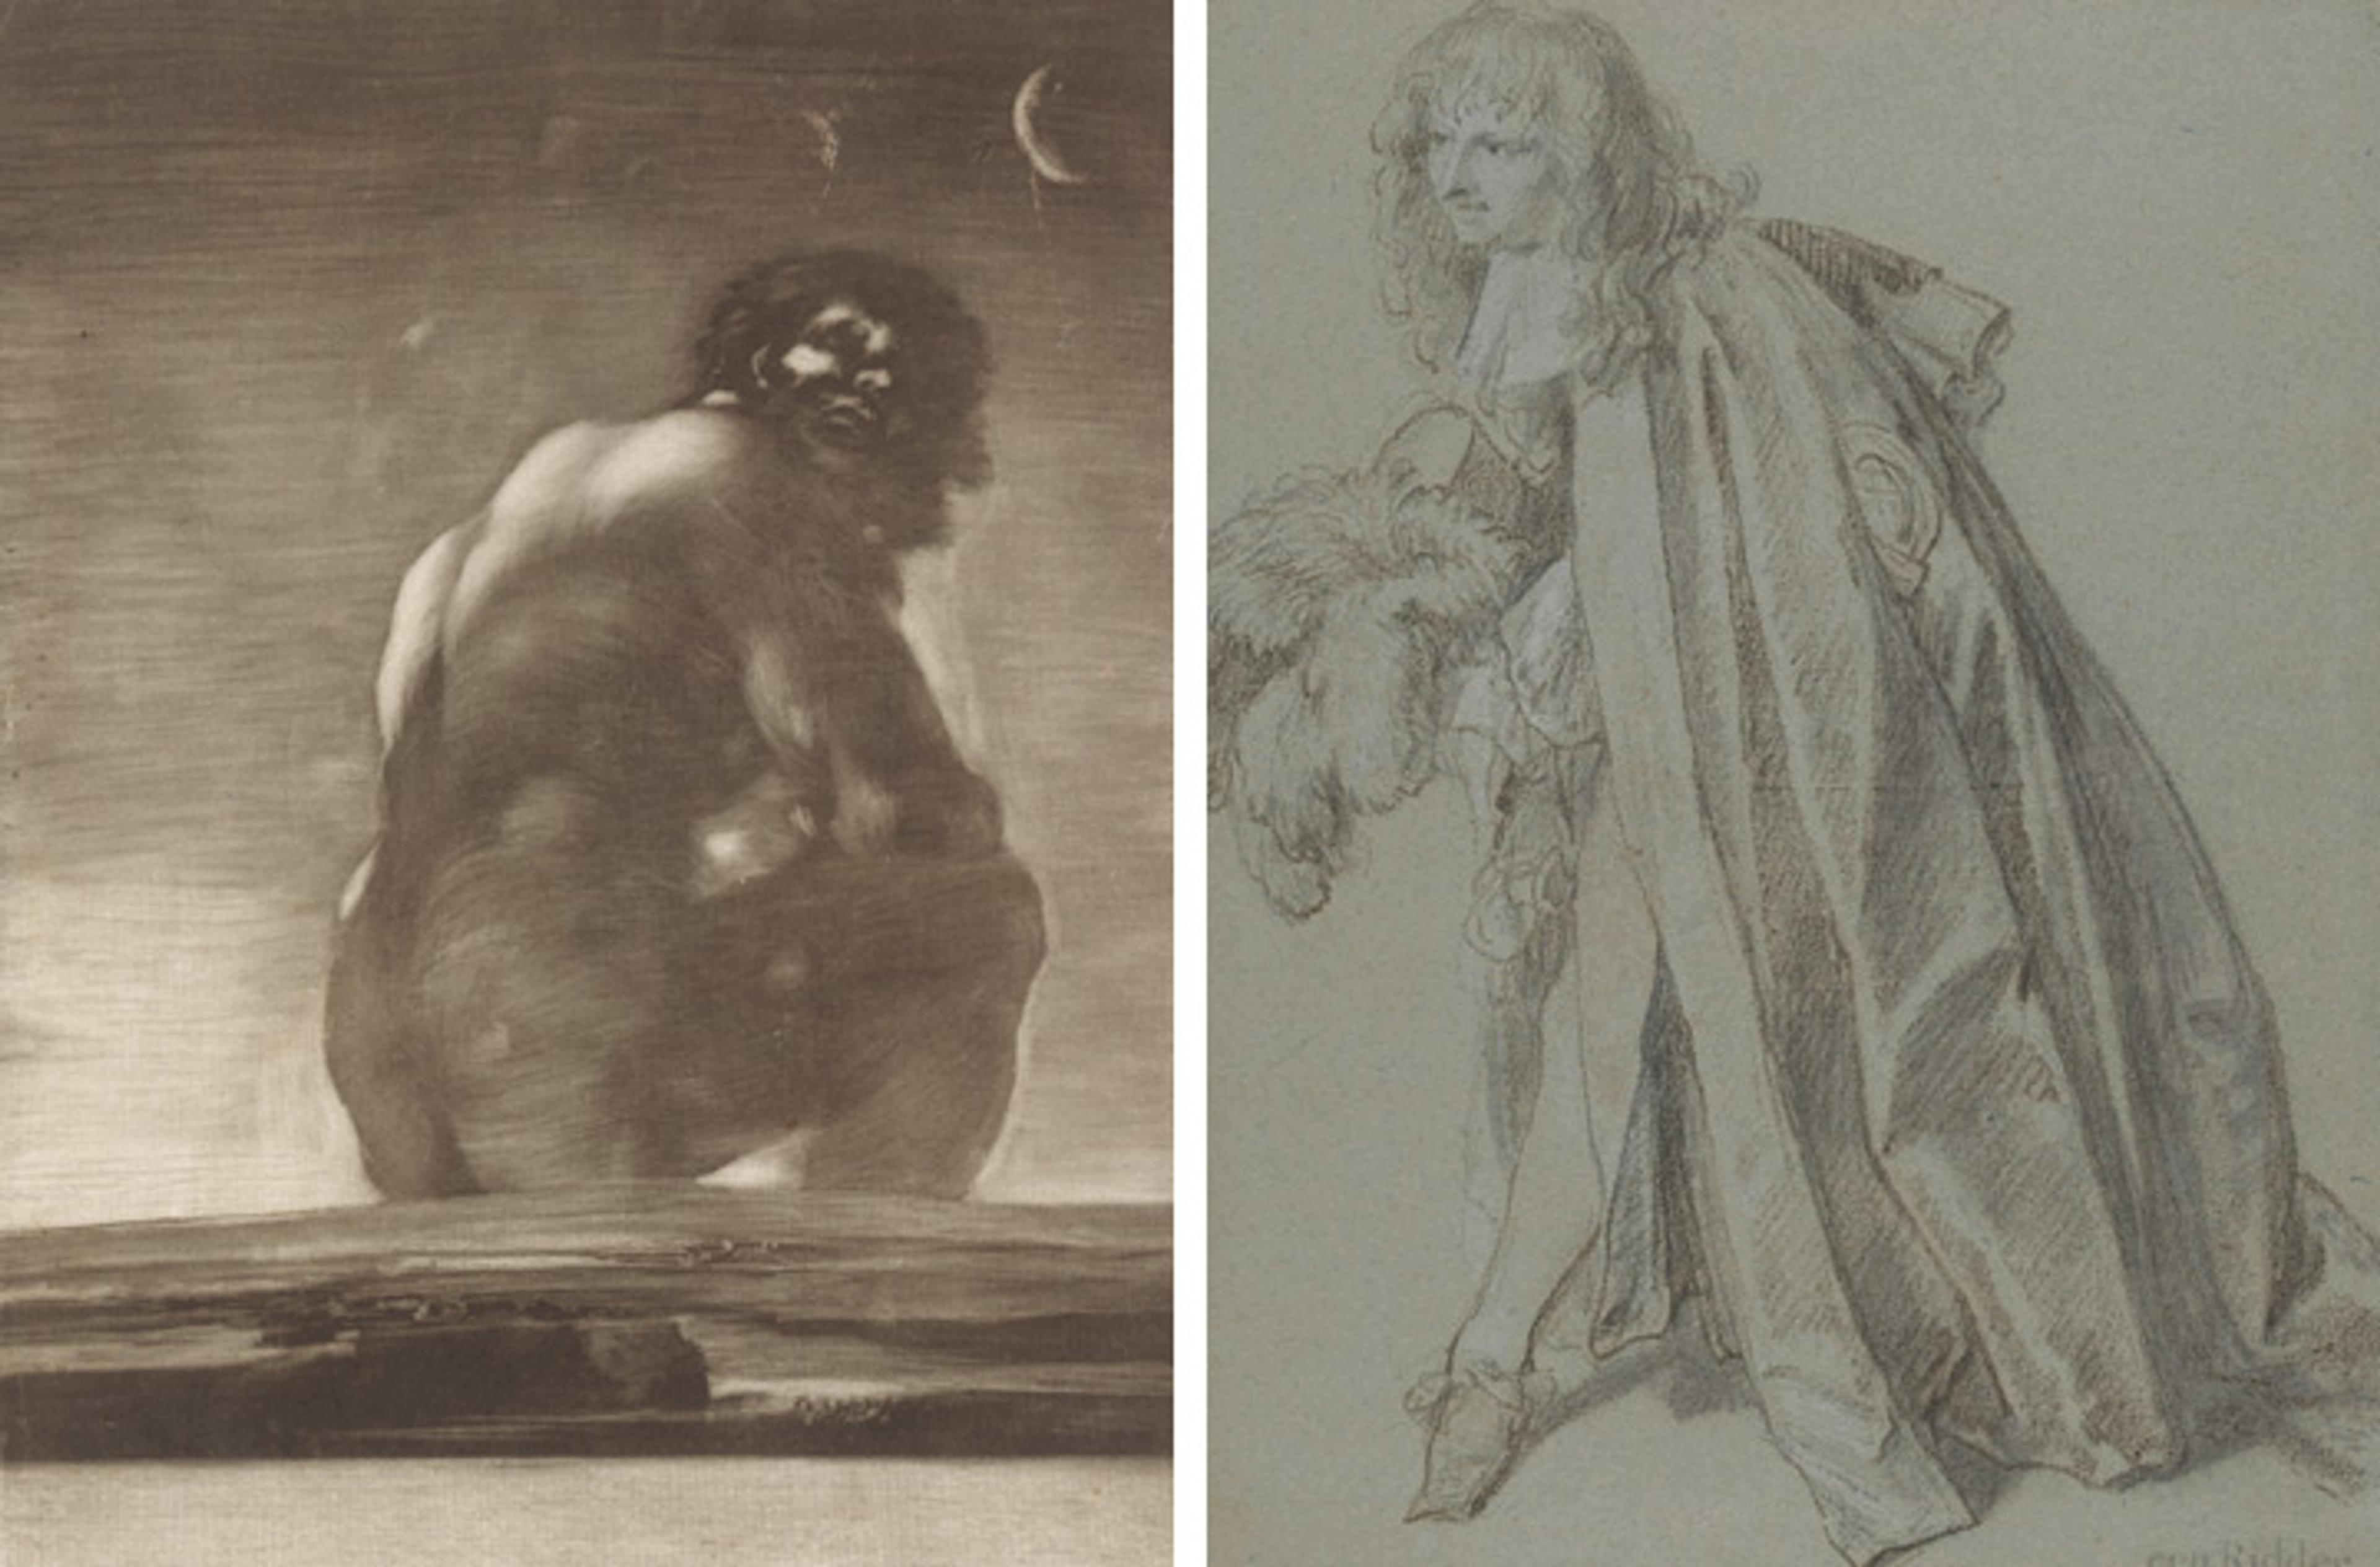 On the left, a Goya aquatint depicting a mythical giant looking over his shoulder; on the right, a chalk and pastel drawing of a 17th-century knight in formal dress